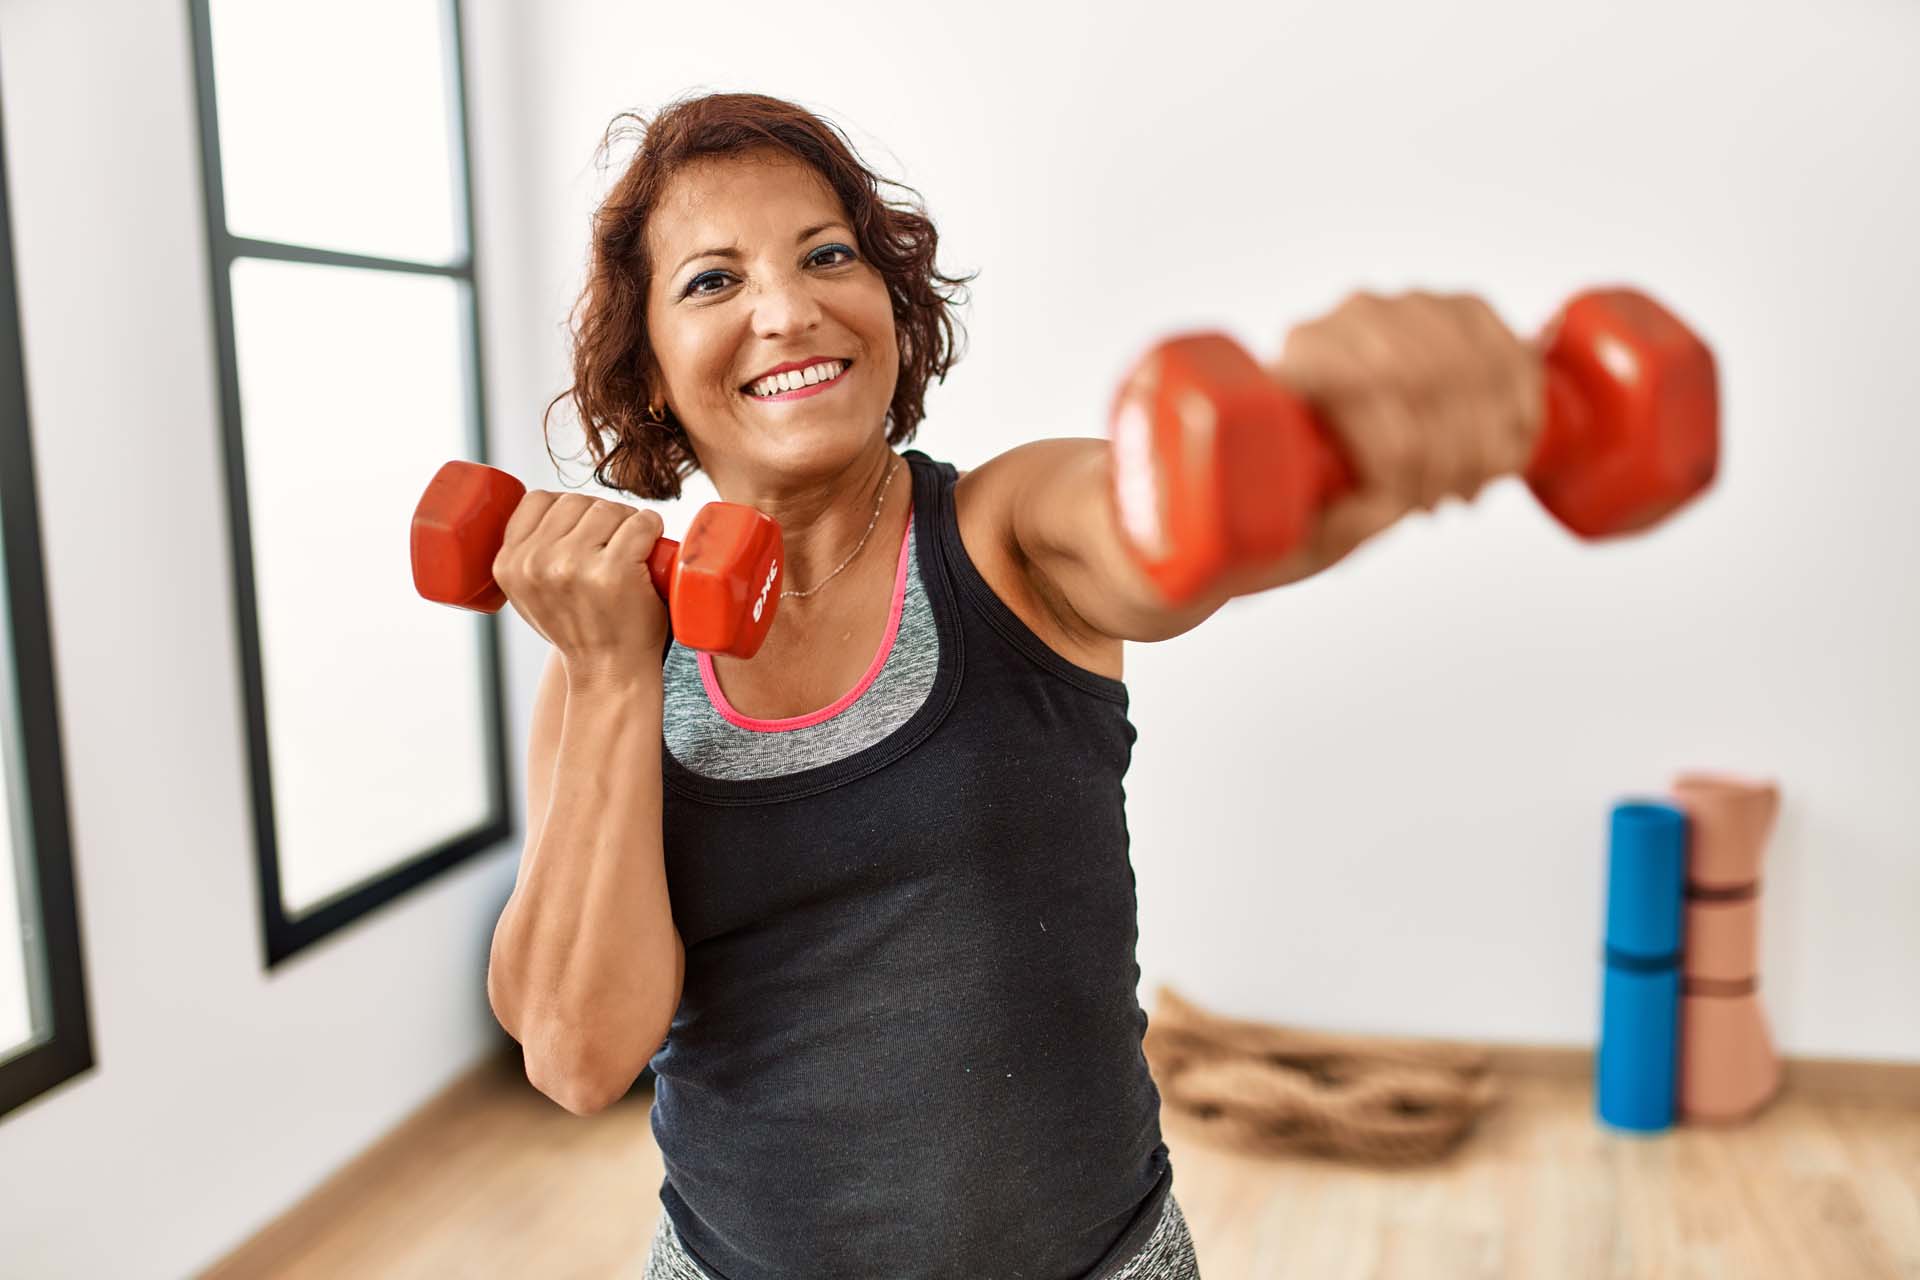 A smiling woman with a dumb bell in each hand in a gym